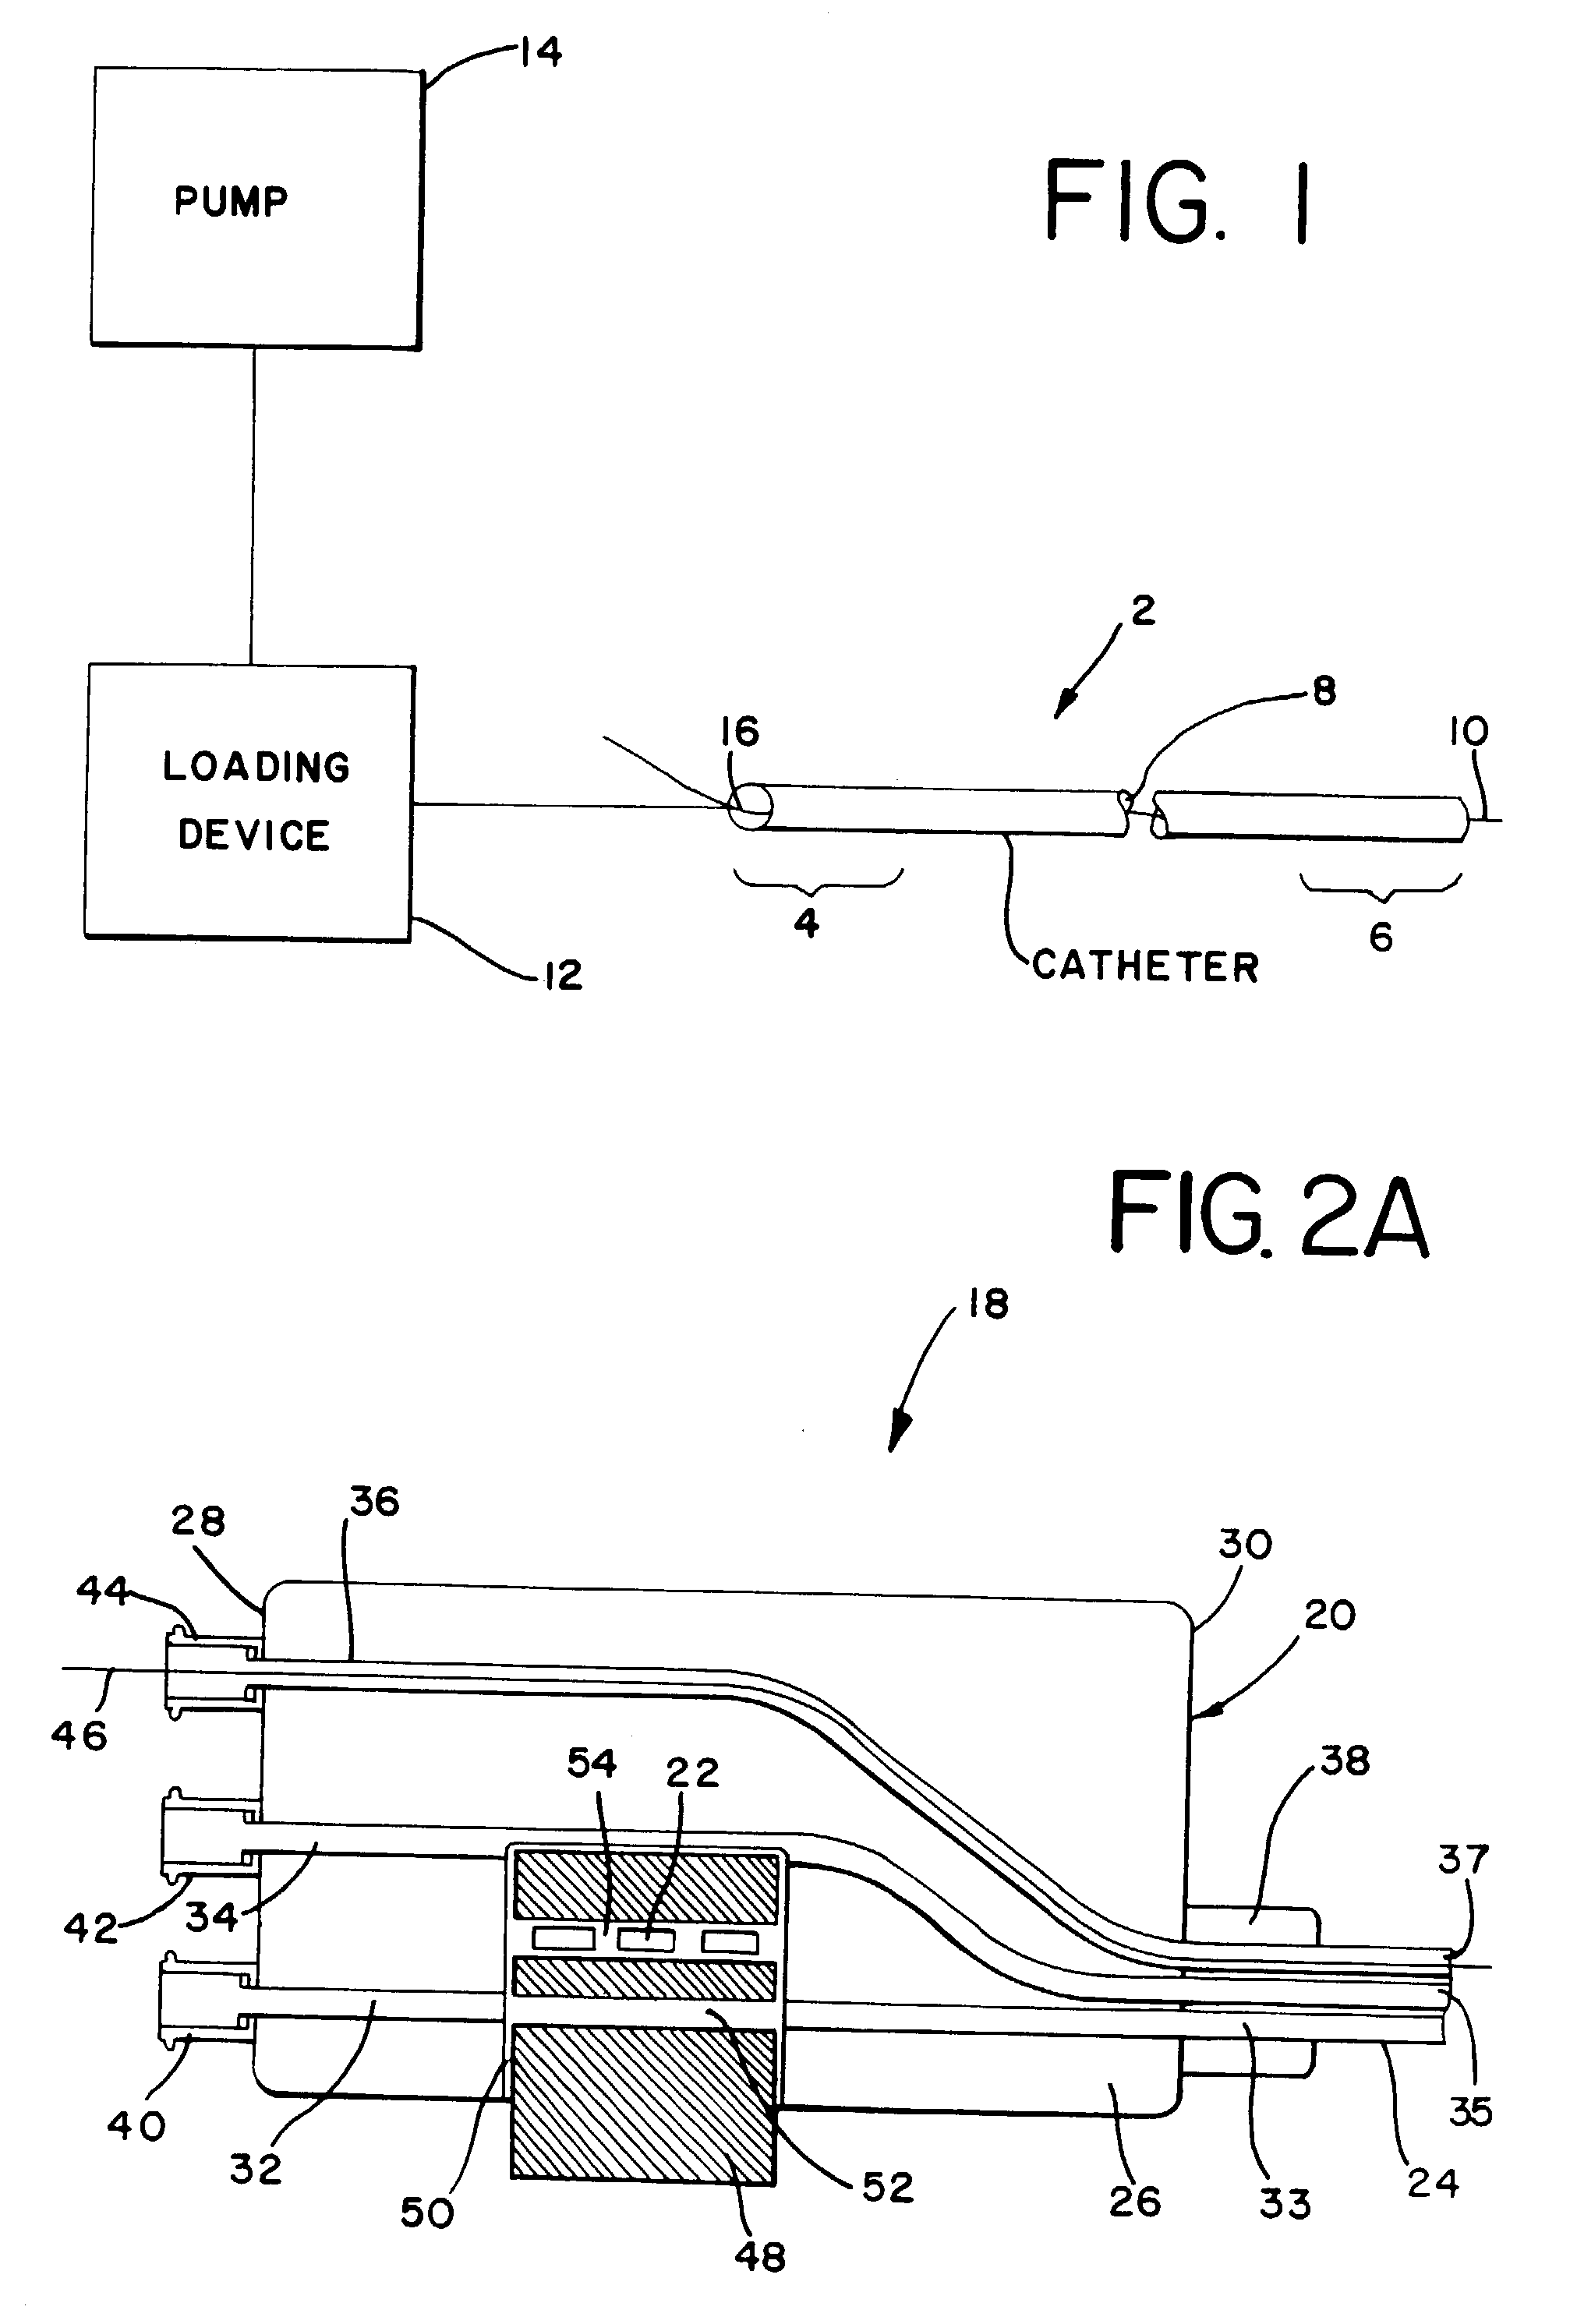 Method and apparatus for treating a desired area in the vascular system of a patient